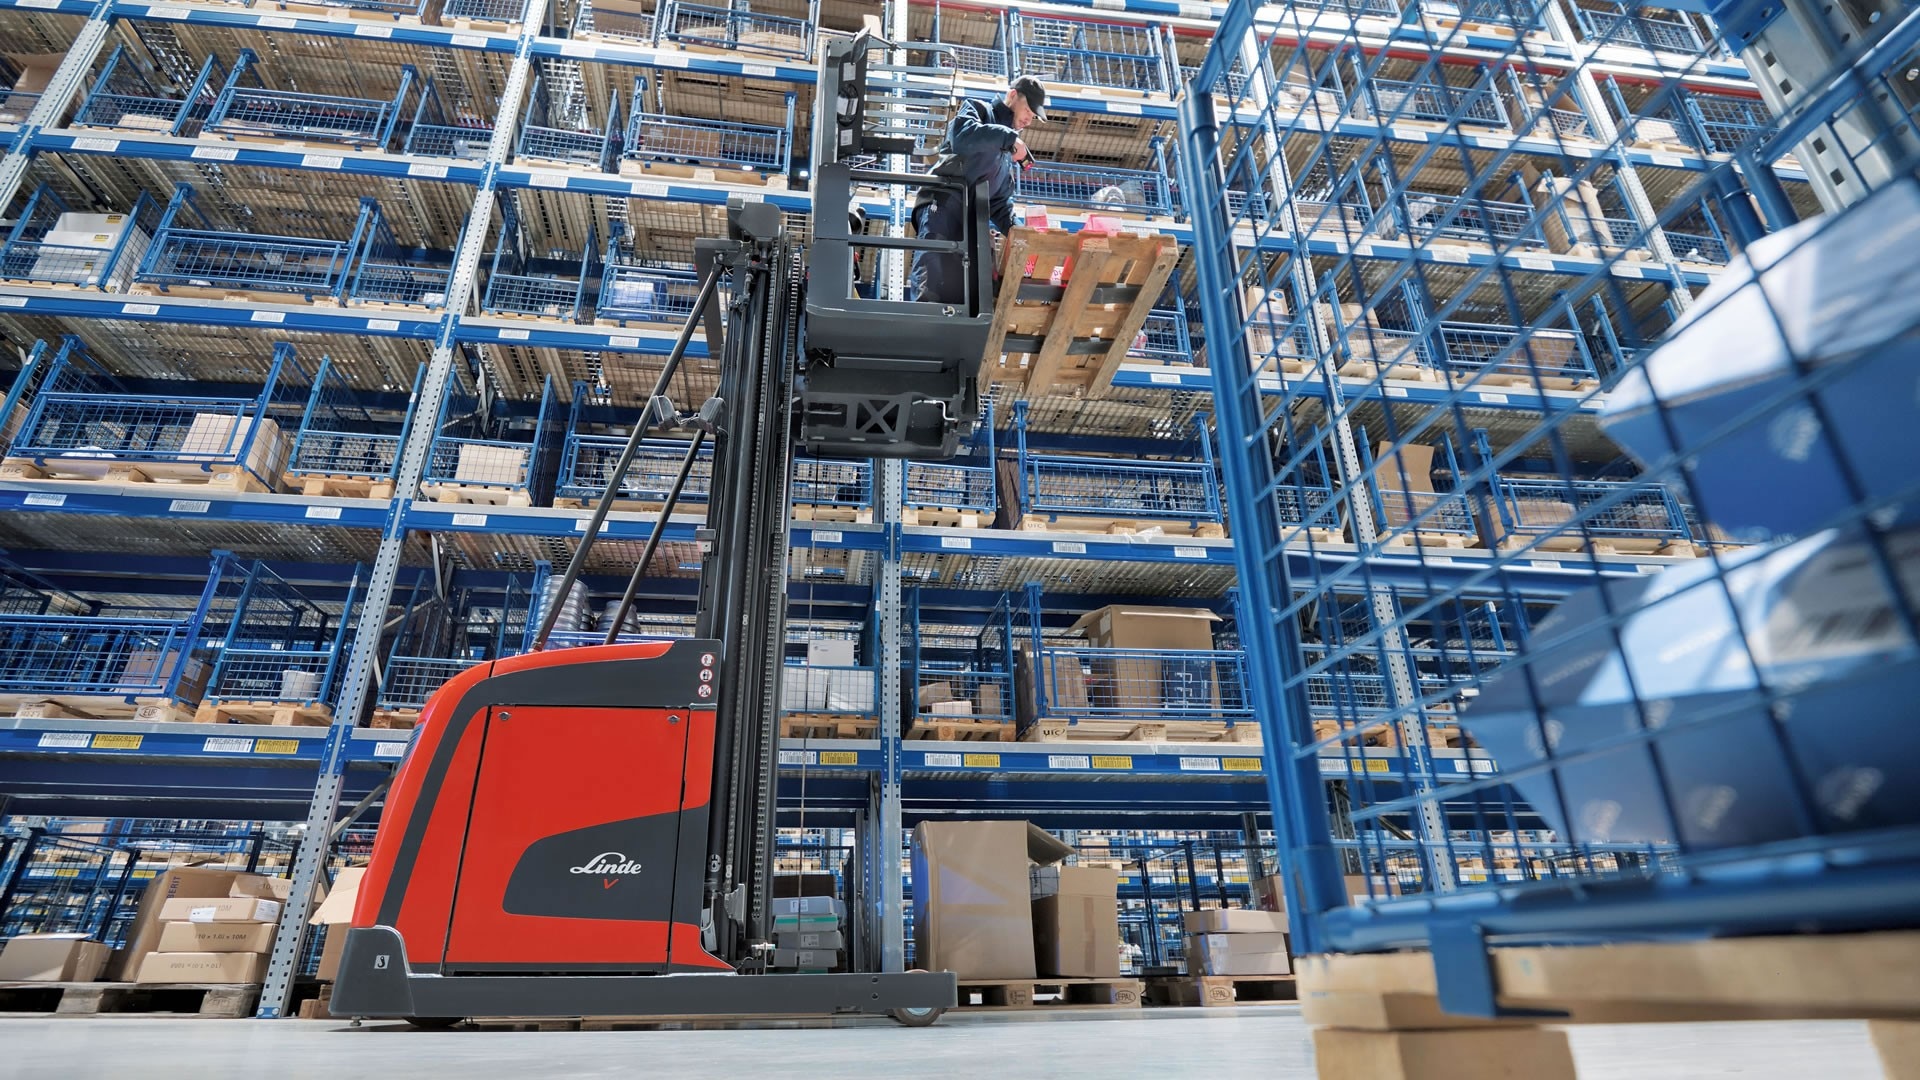 Five Common Types Of Warehouse Pickers & Forklifts